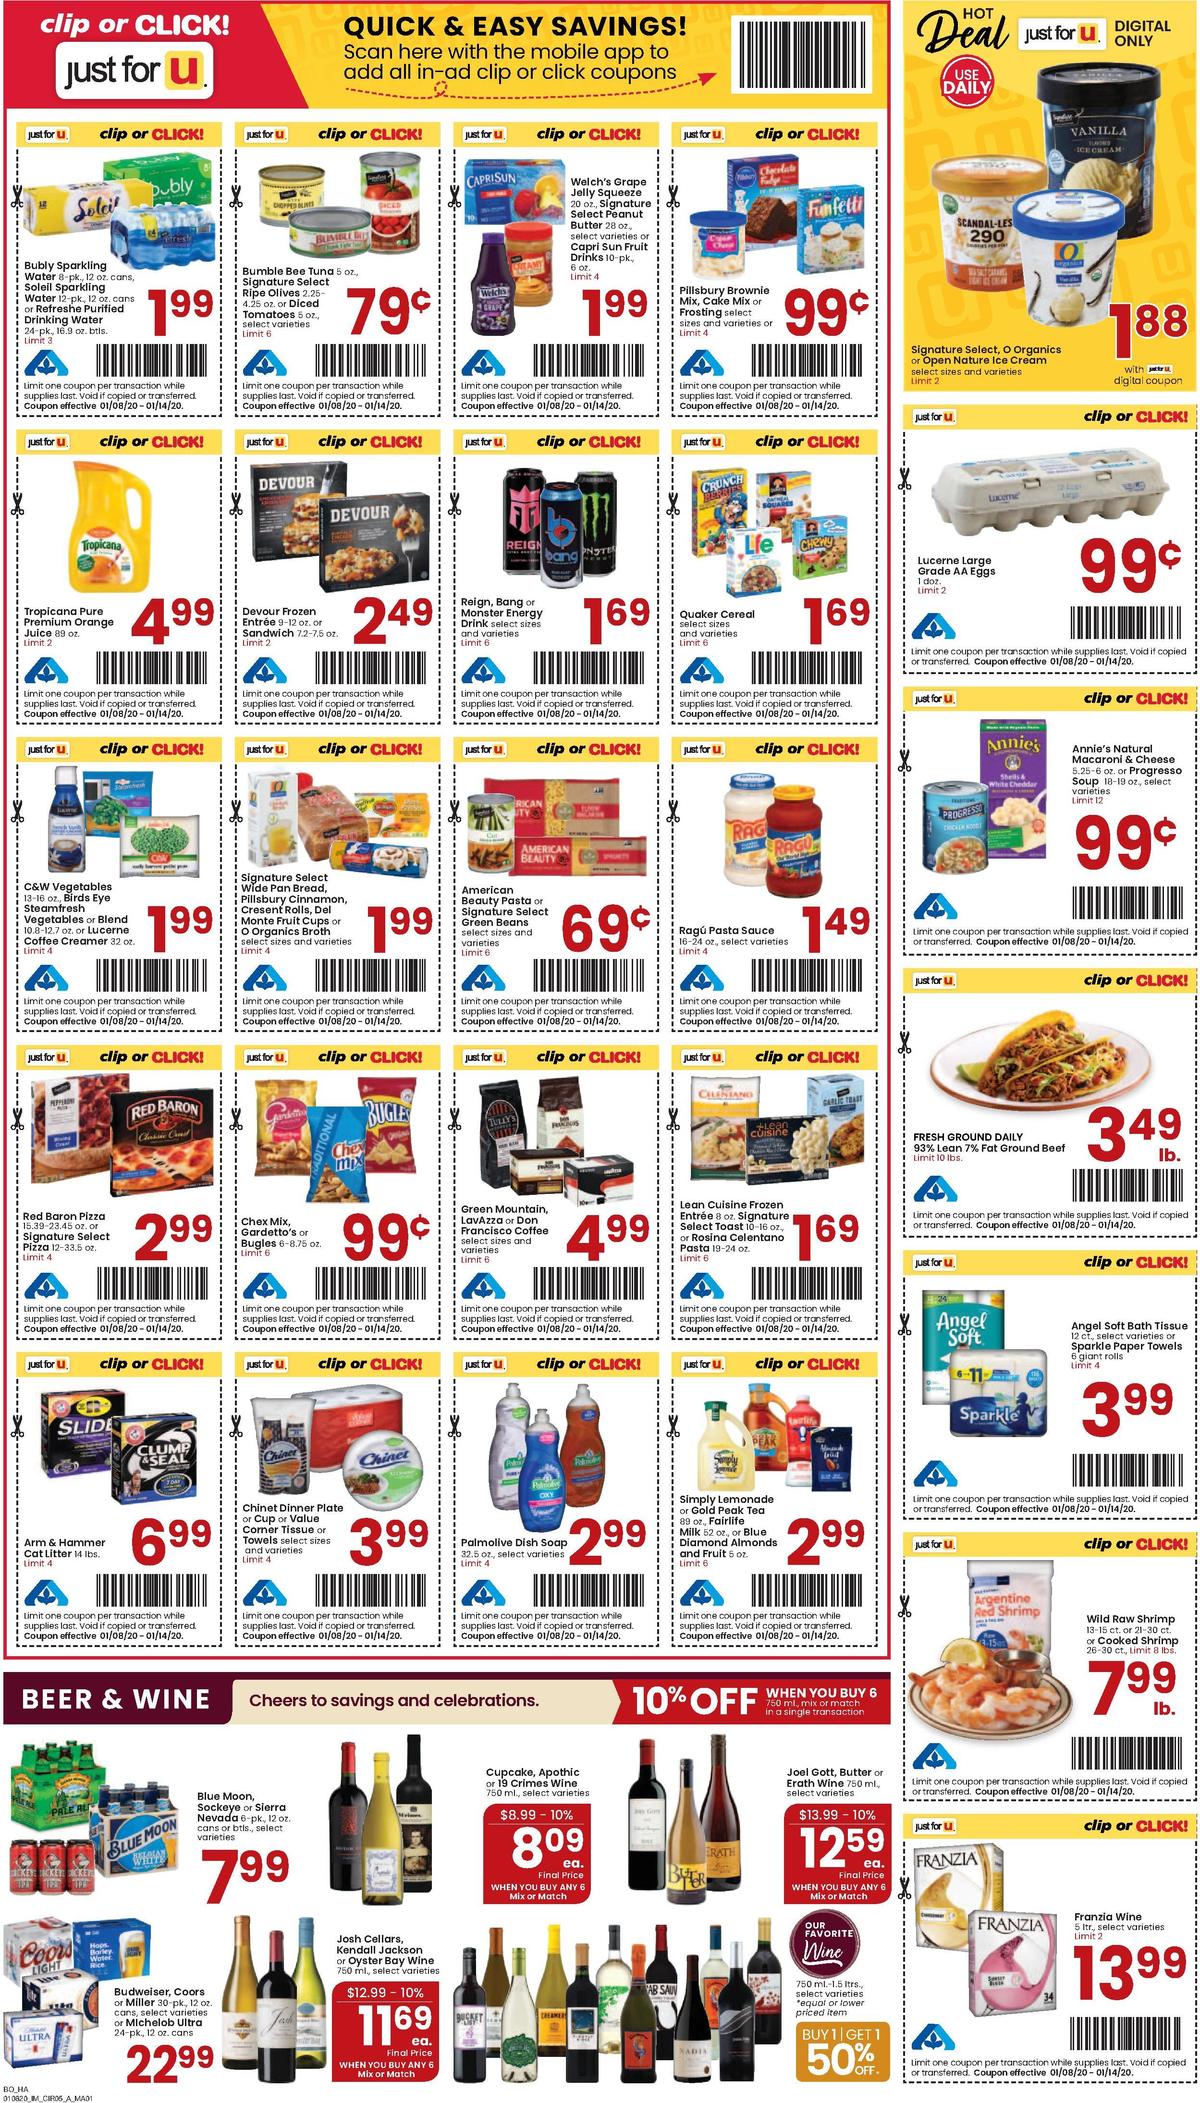 Albertsons Weekly Ad from January 8